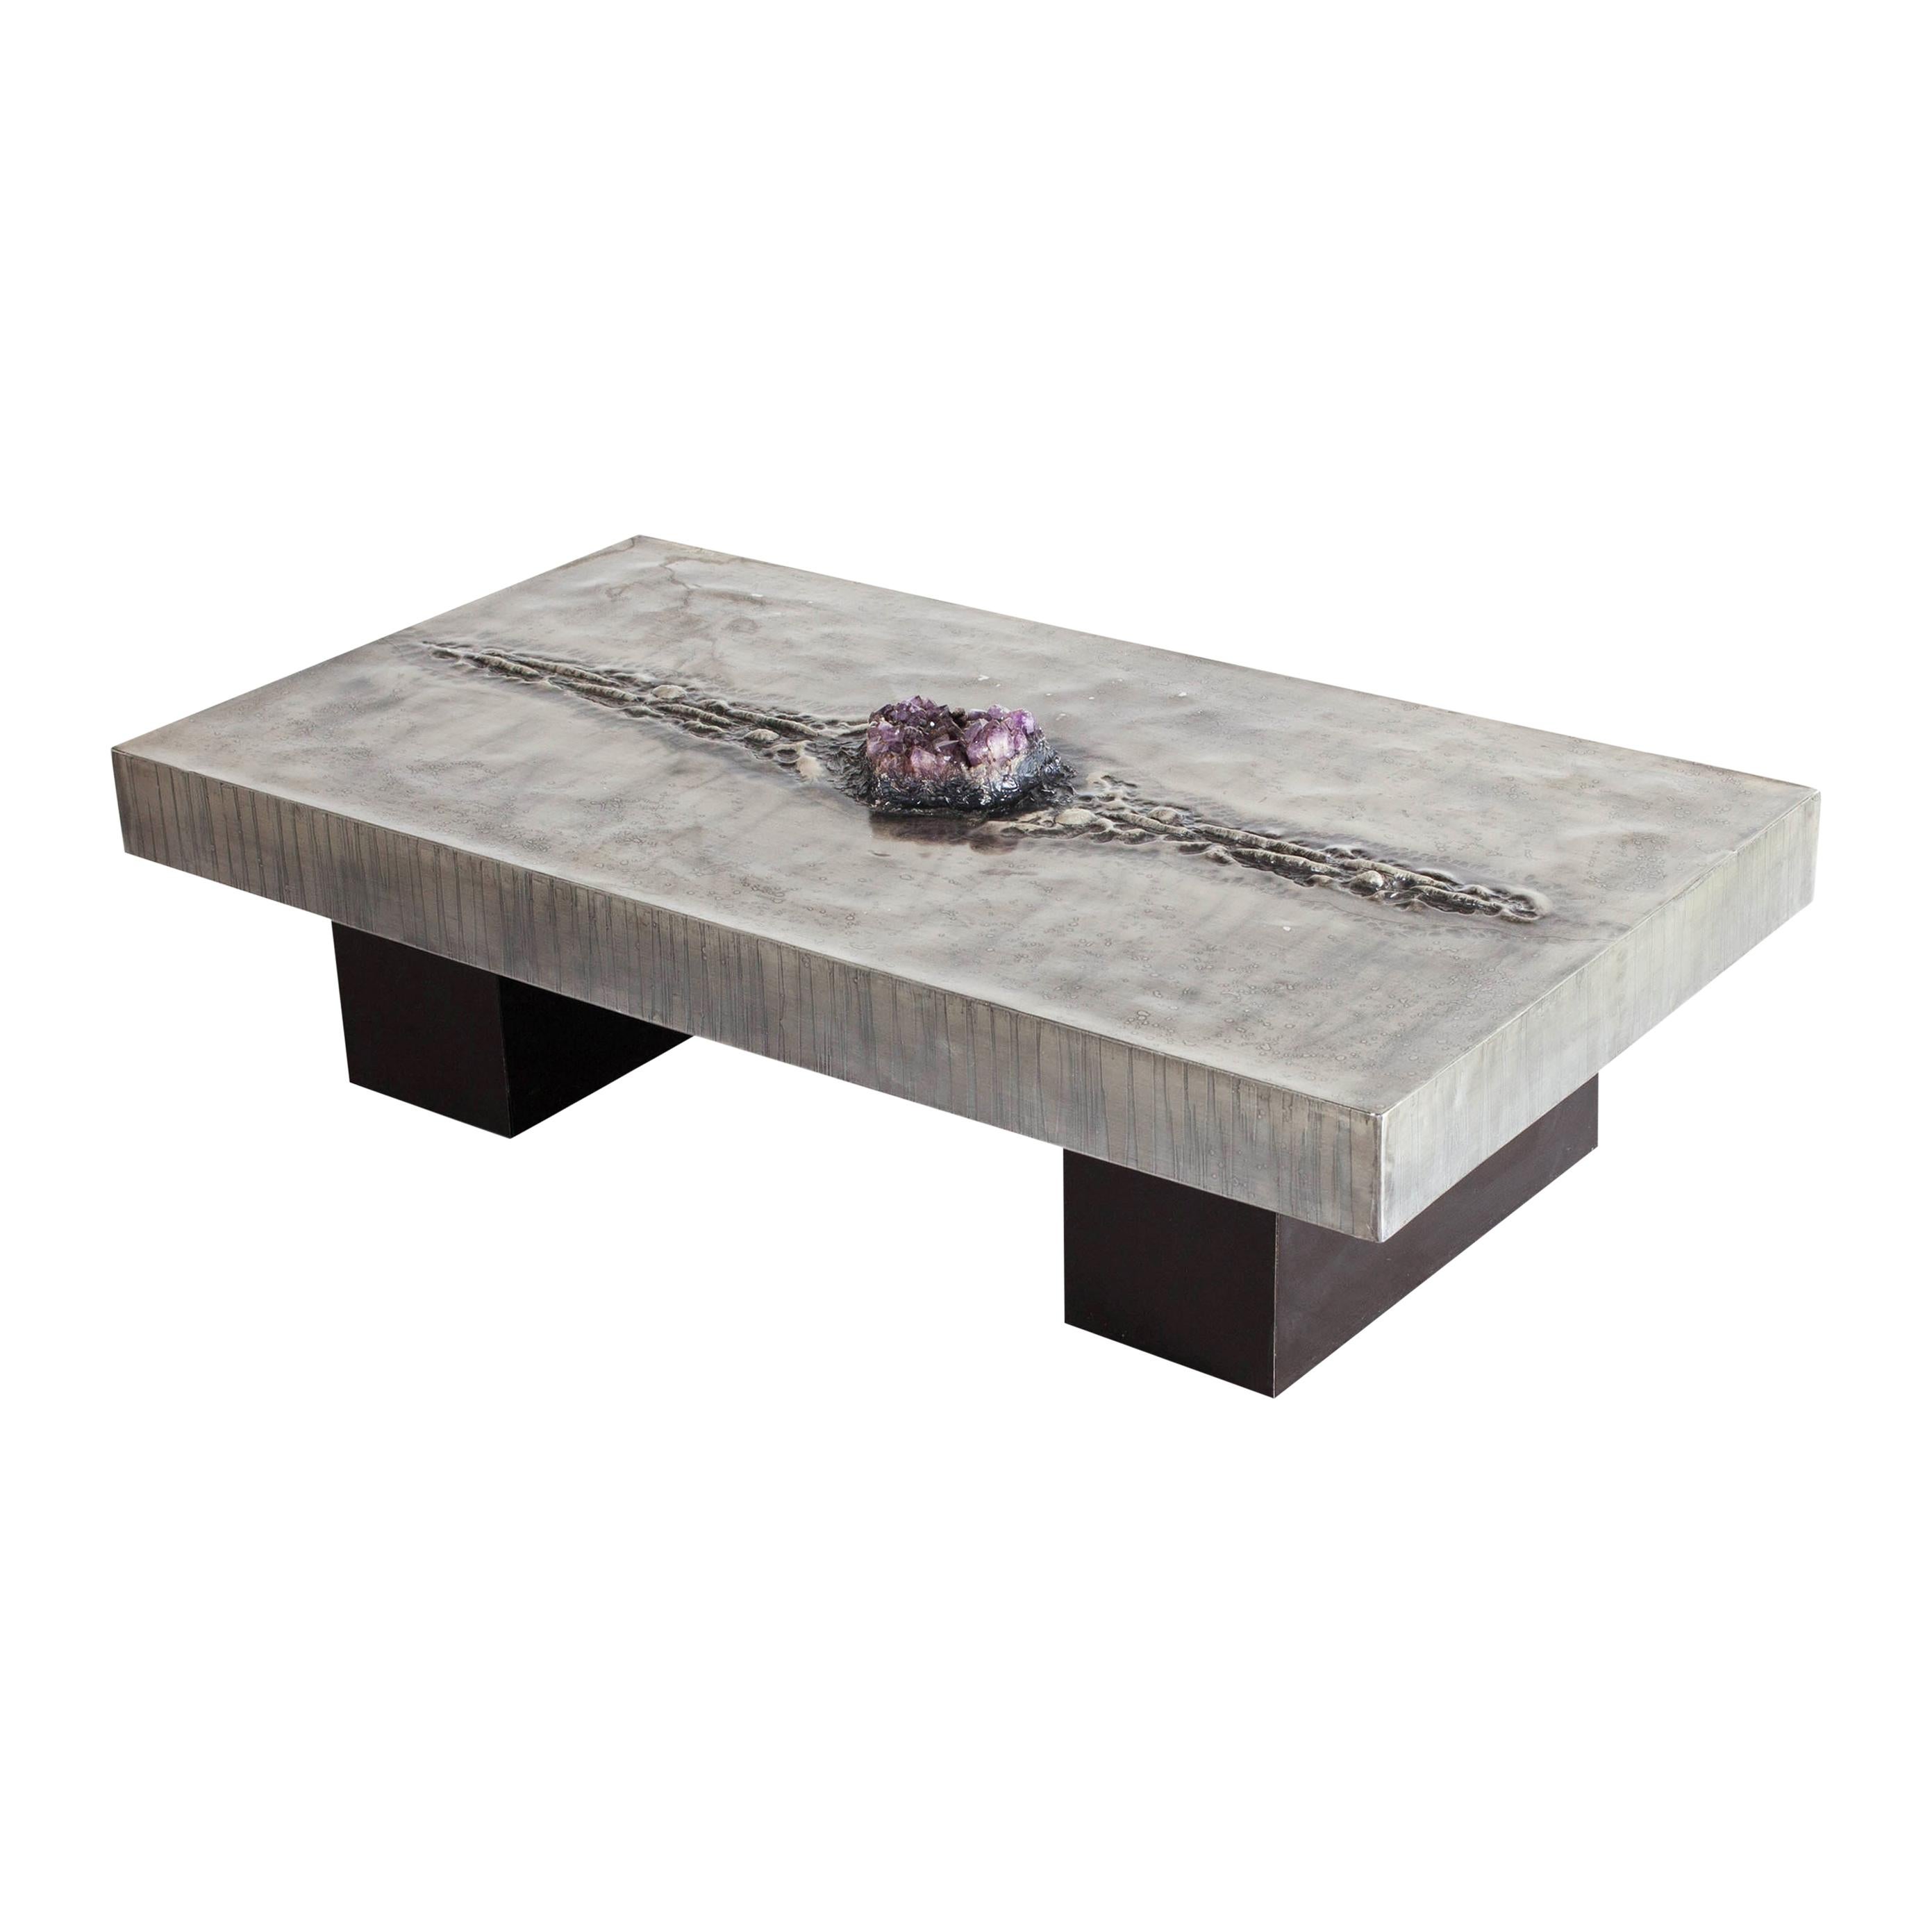 Etched Coffee Table with Amethyst Inlay by Marc D'Haenens